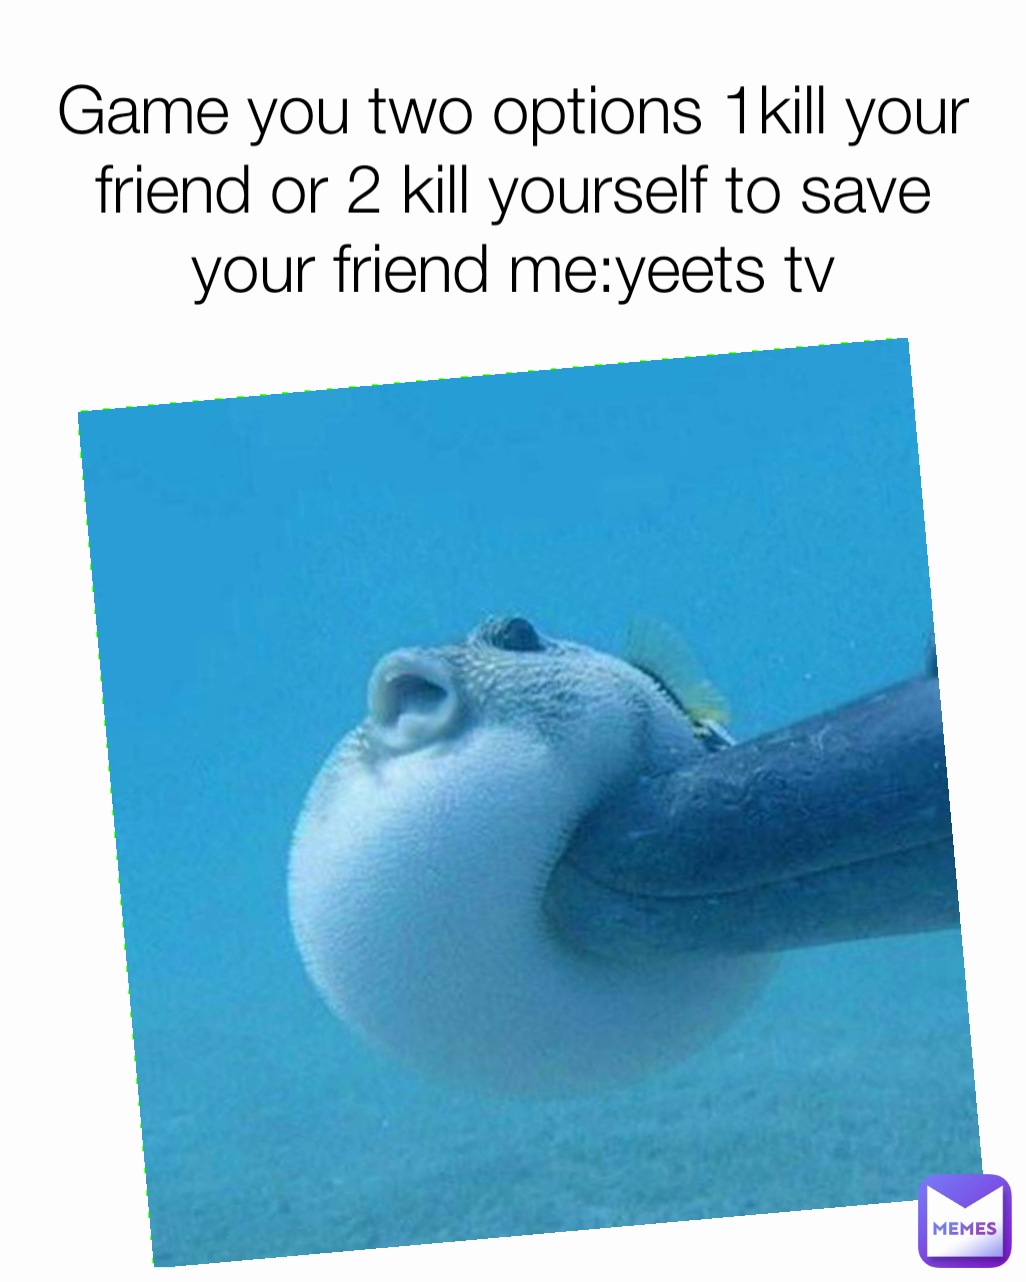 Game you two options 1kill your friend or 2 kill yourself to save your friend me:yeets tv